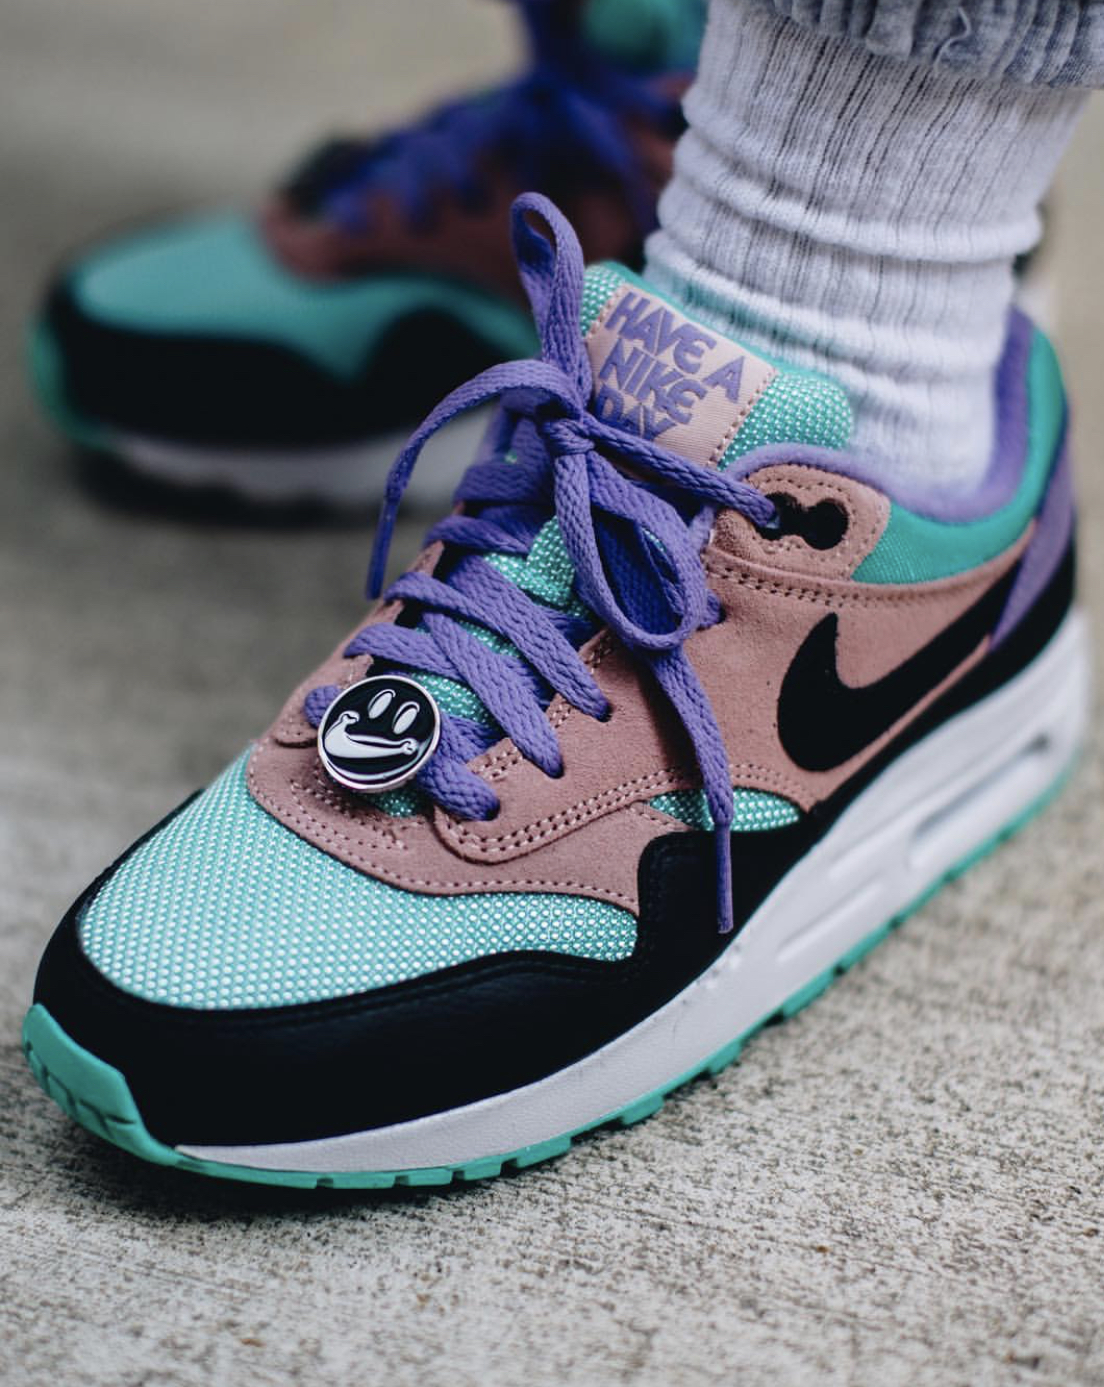 Observatie Giet materiaal Restock: Men's Nike Air Max 1 "Have a Nike Day" — Sneaker Shouts